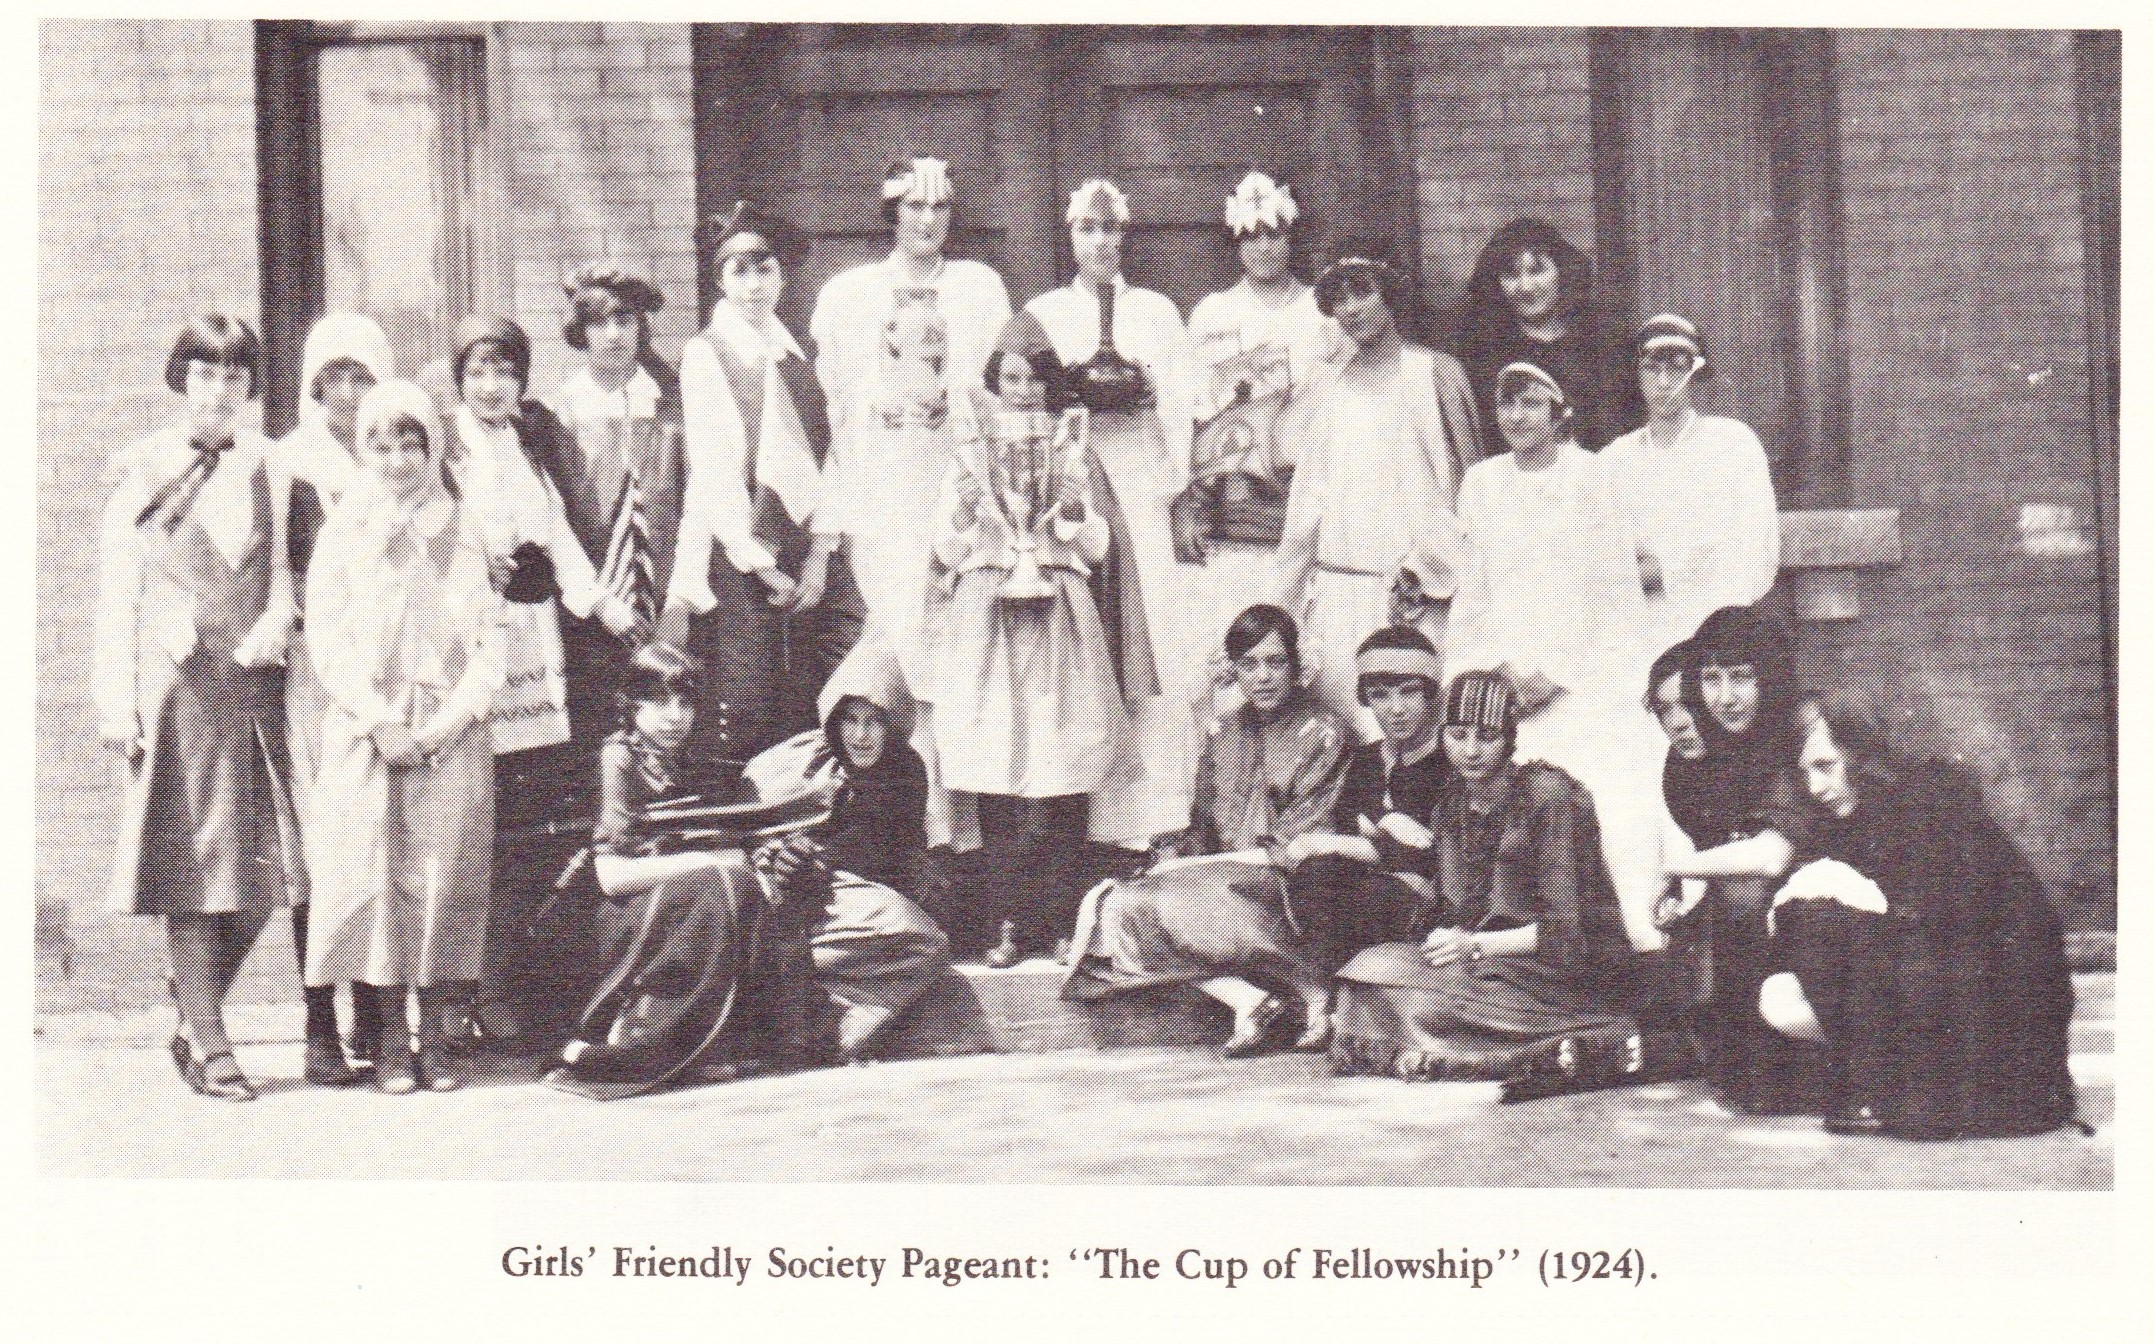 Girl's Friendly Society Pageant 1924